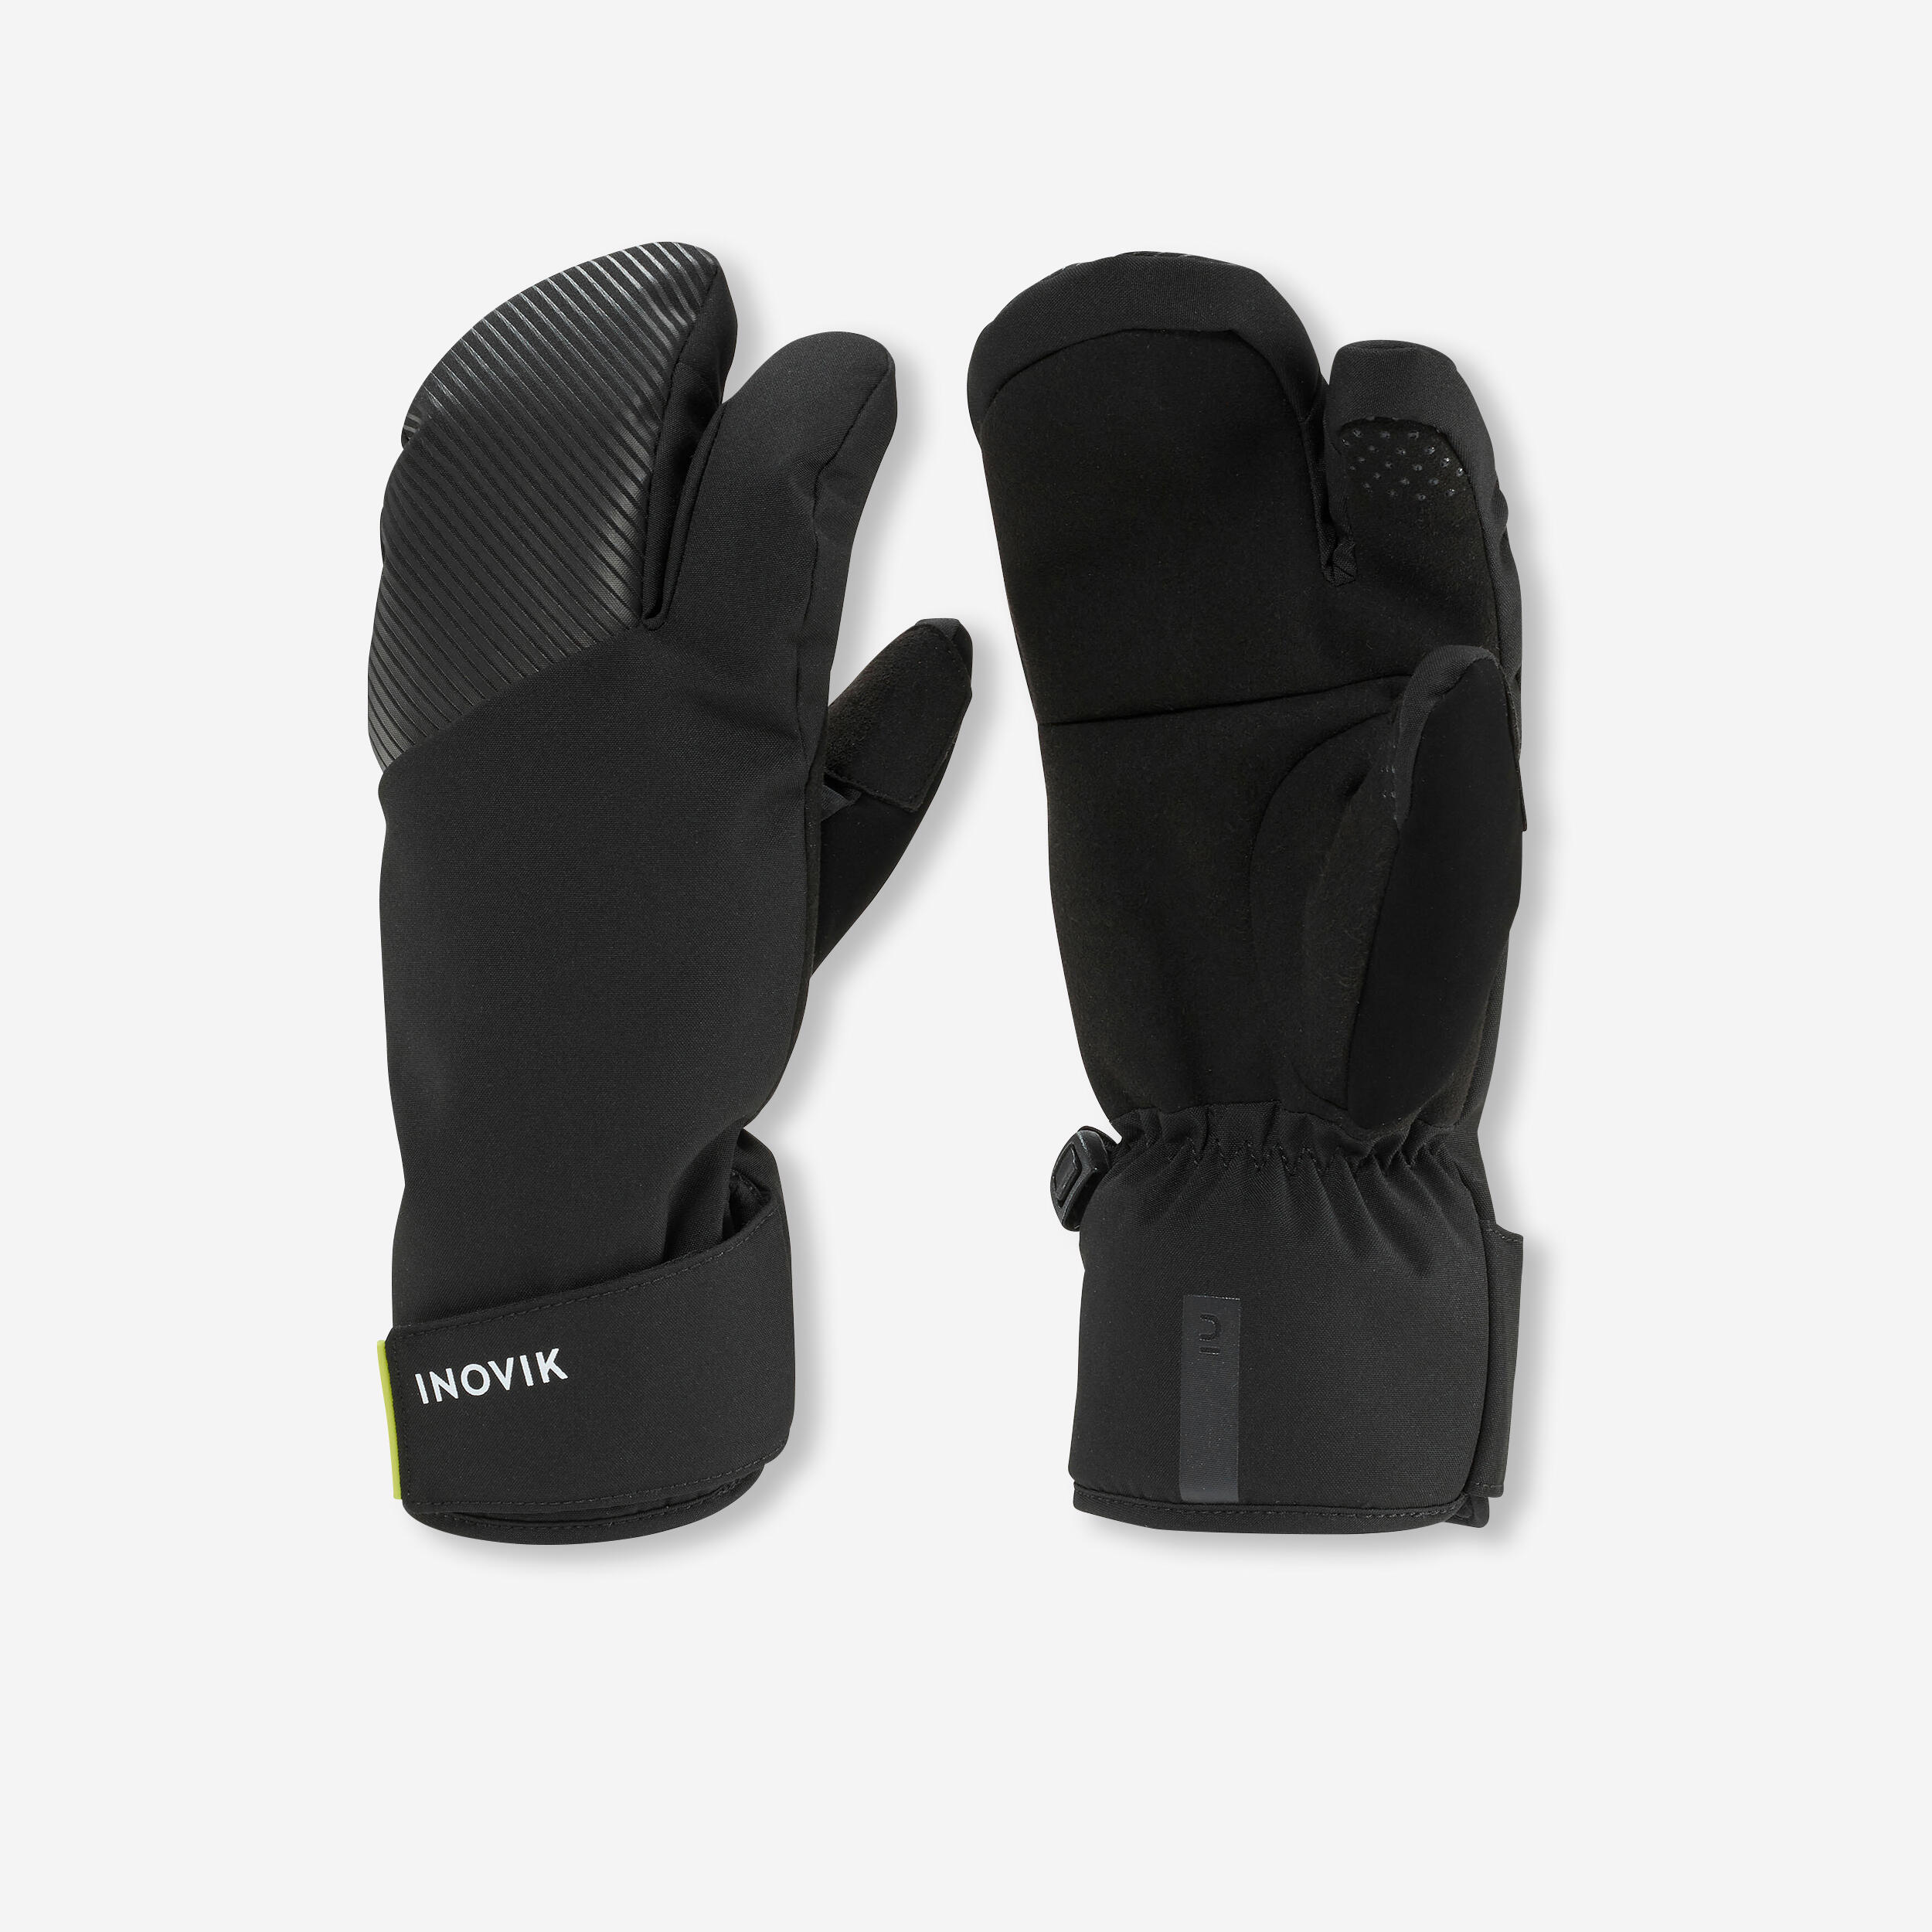 Kids' cross-country skiing warm gloves 1/6